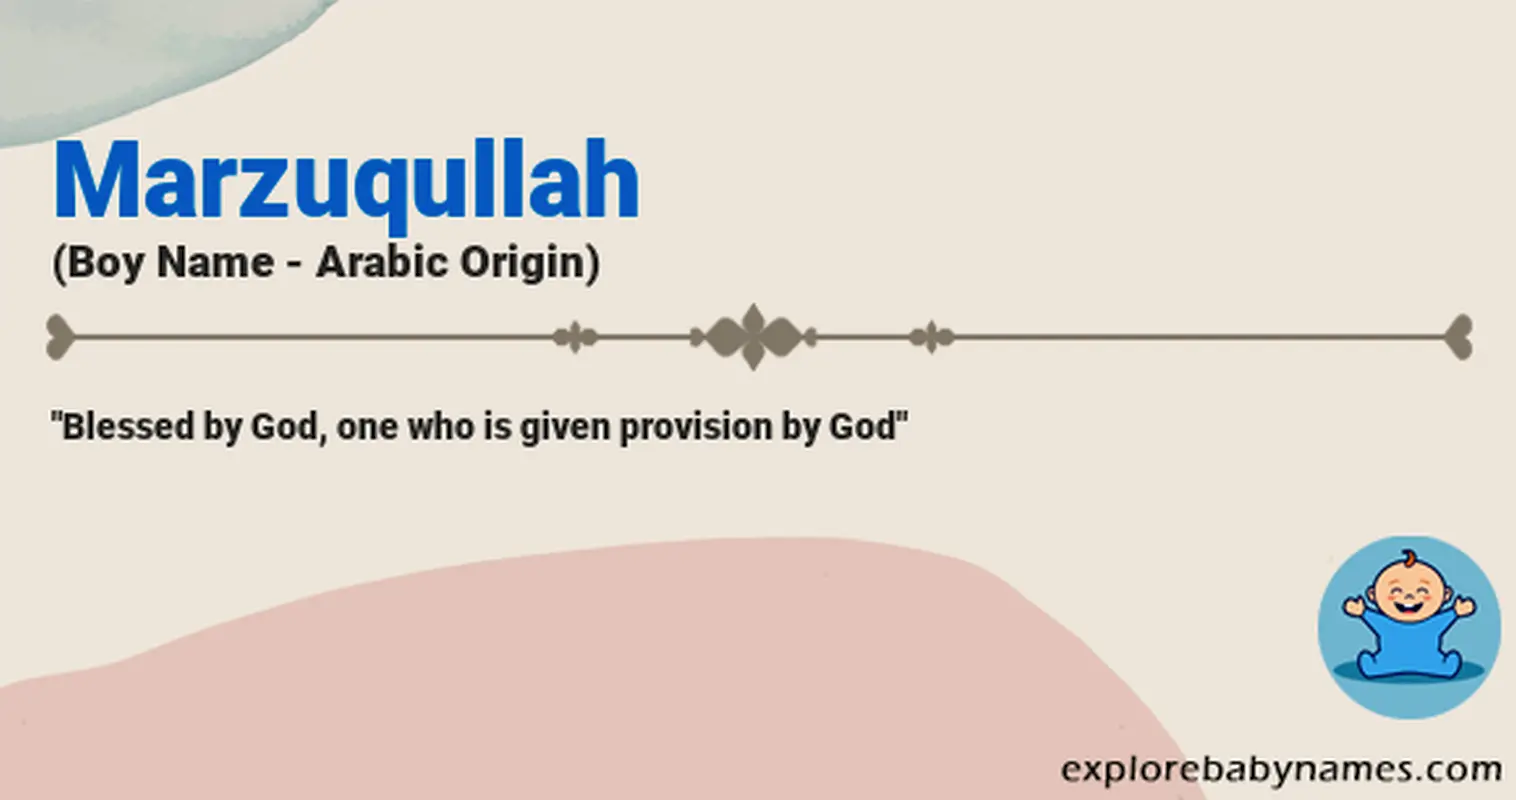 Meaning of Marzuqullah